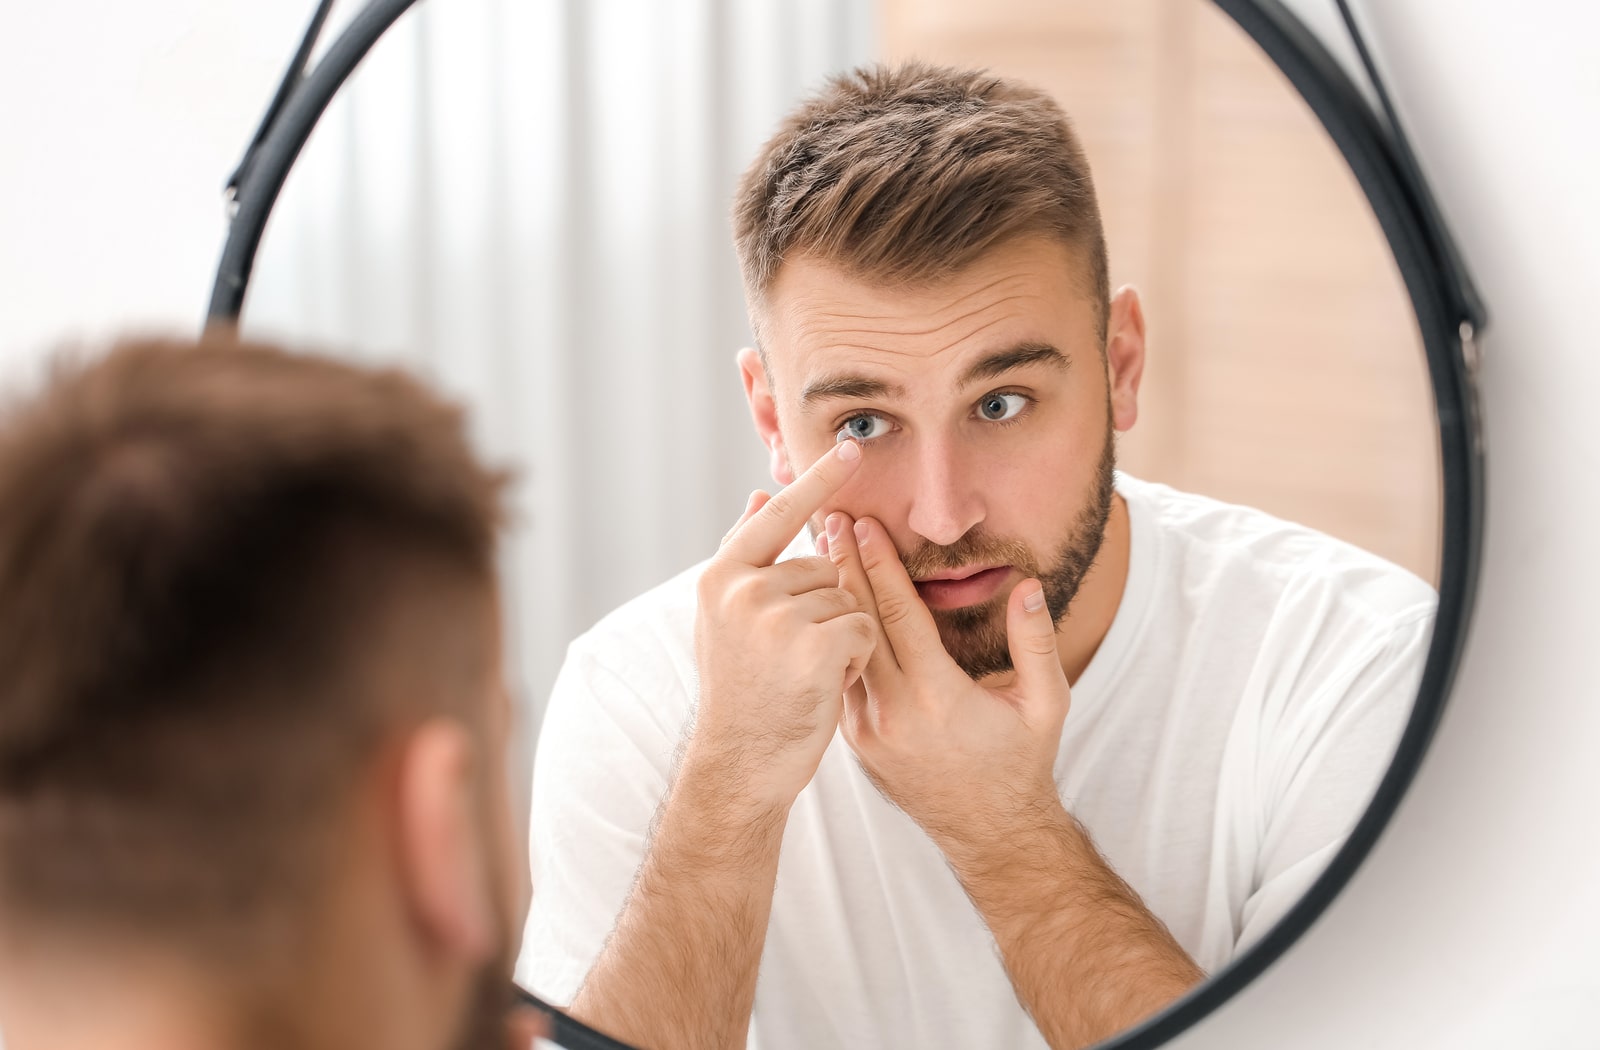 A man looking at himself in the mirror while he puts a contact lens in his eye